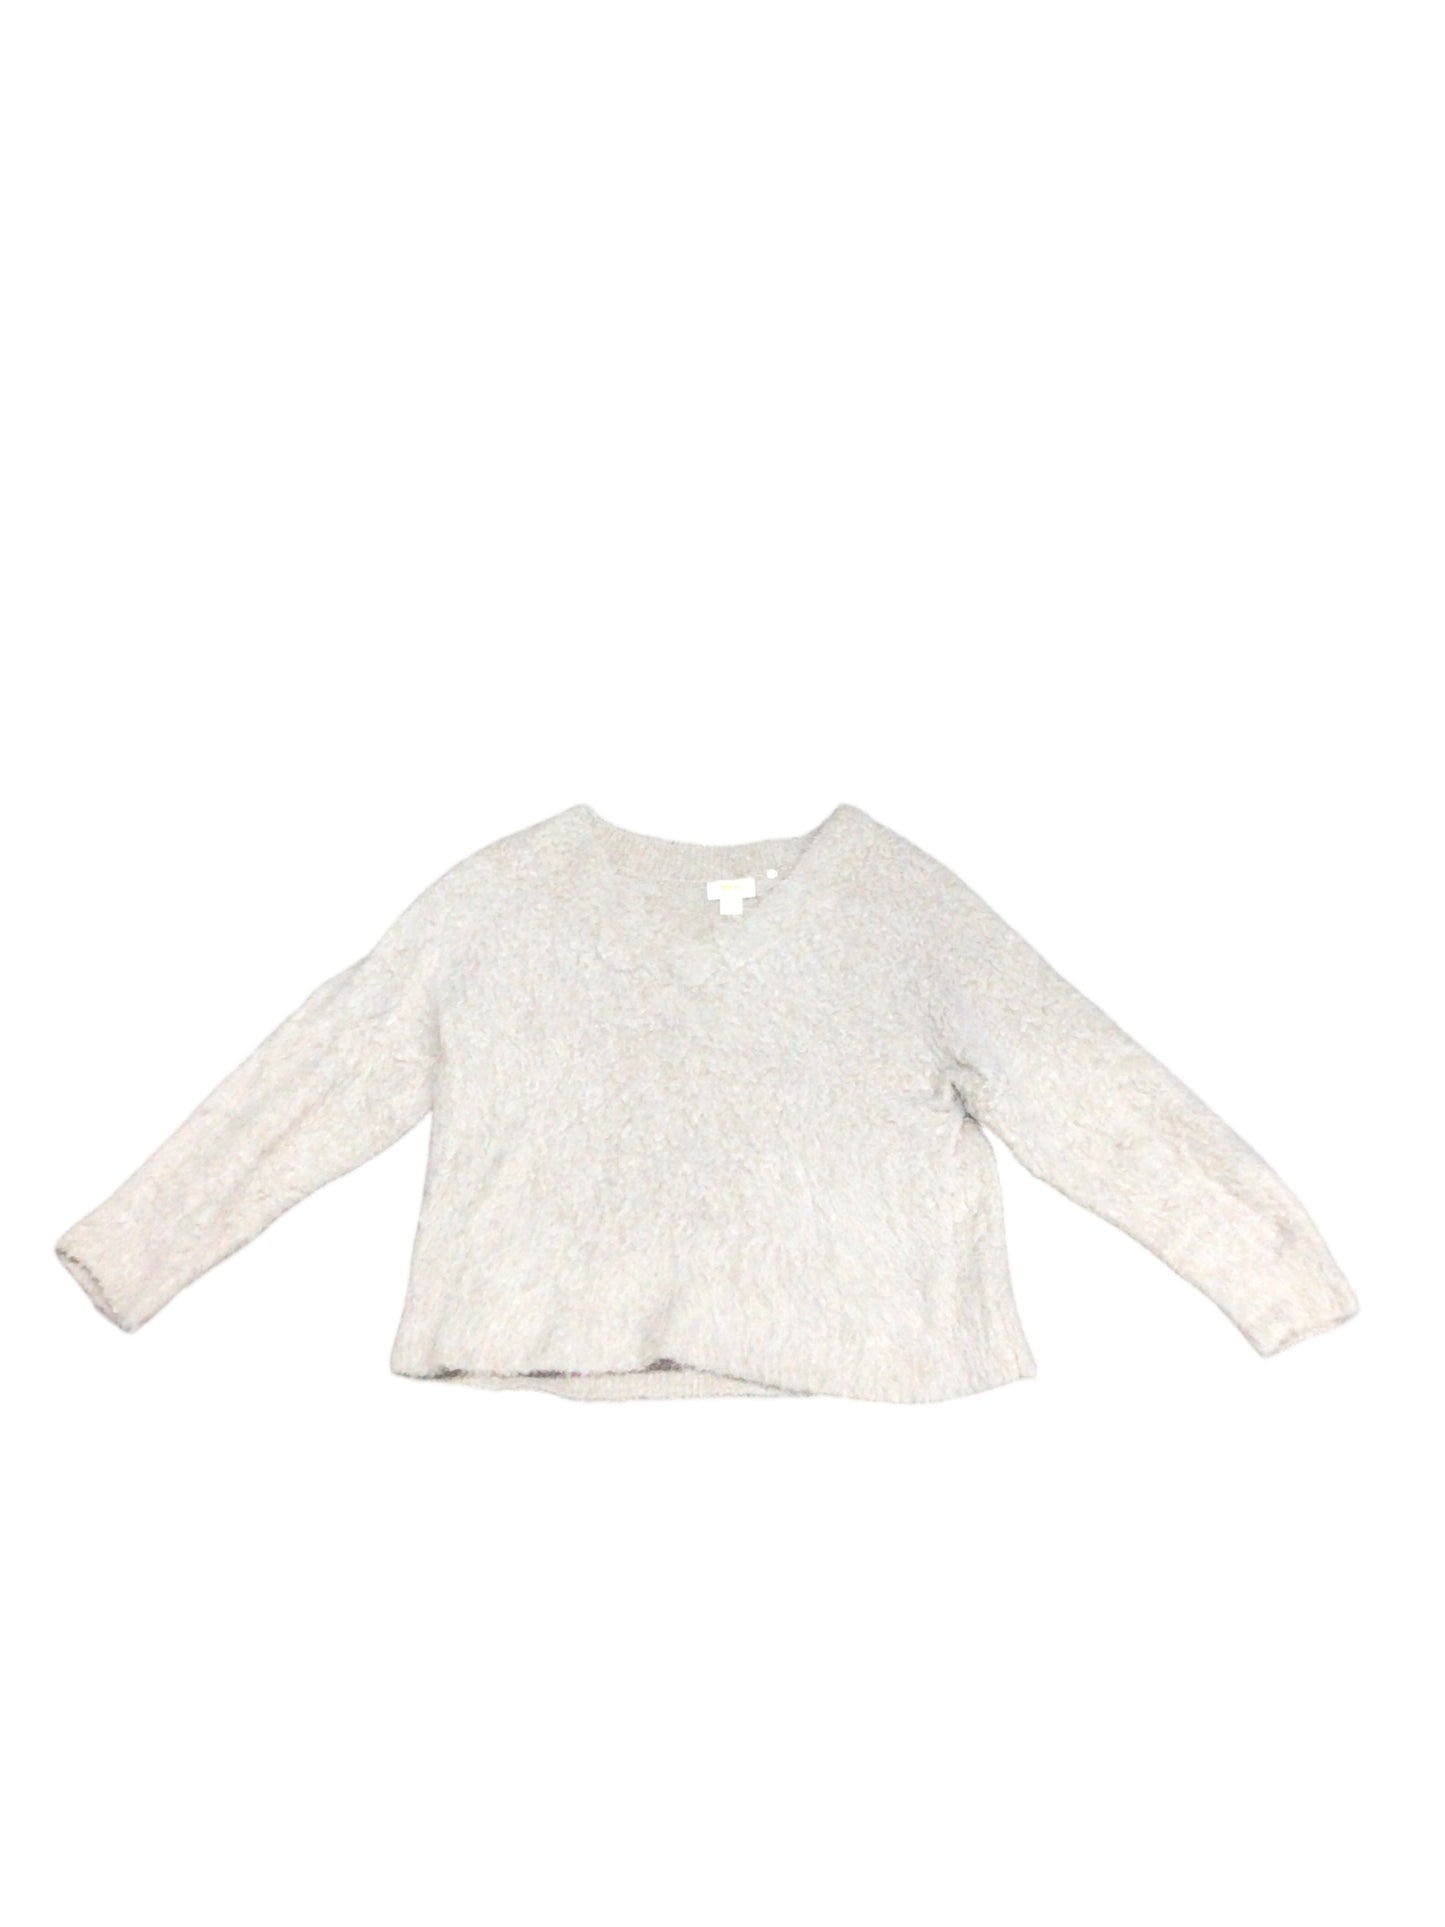 Sweater By Maeve  Size: M